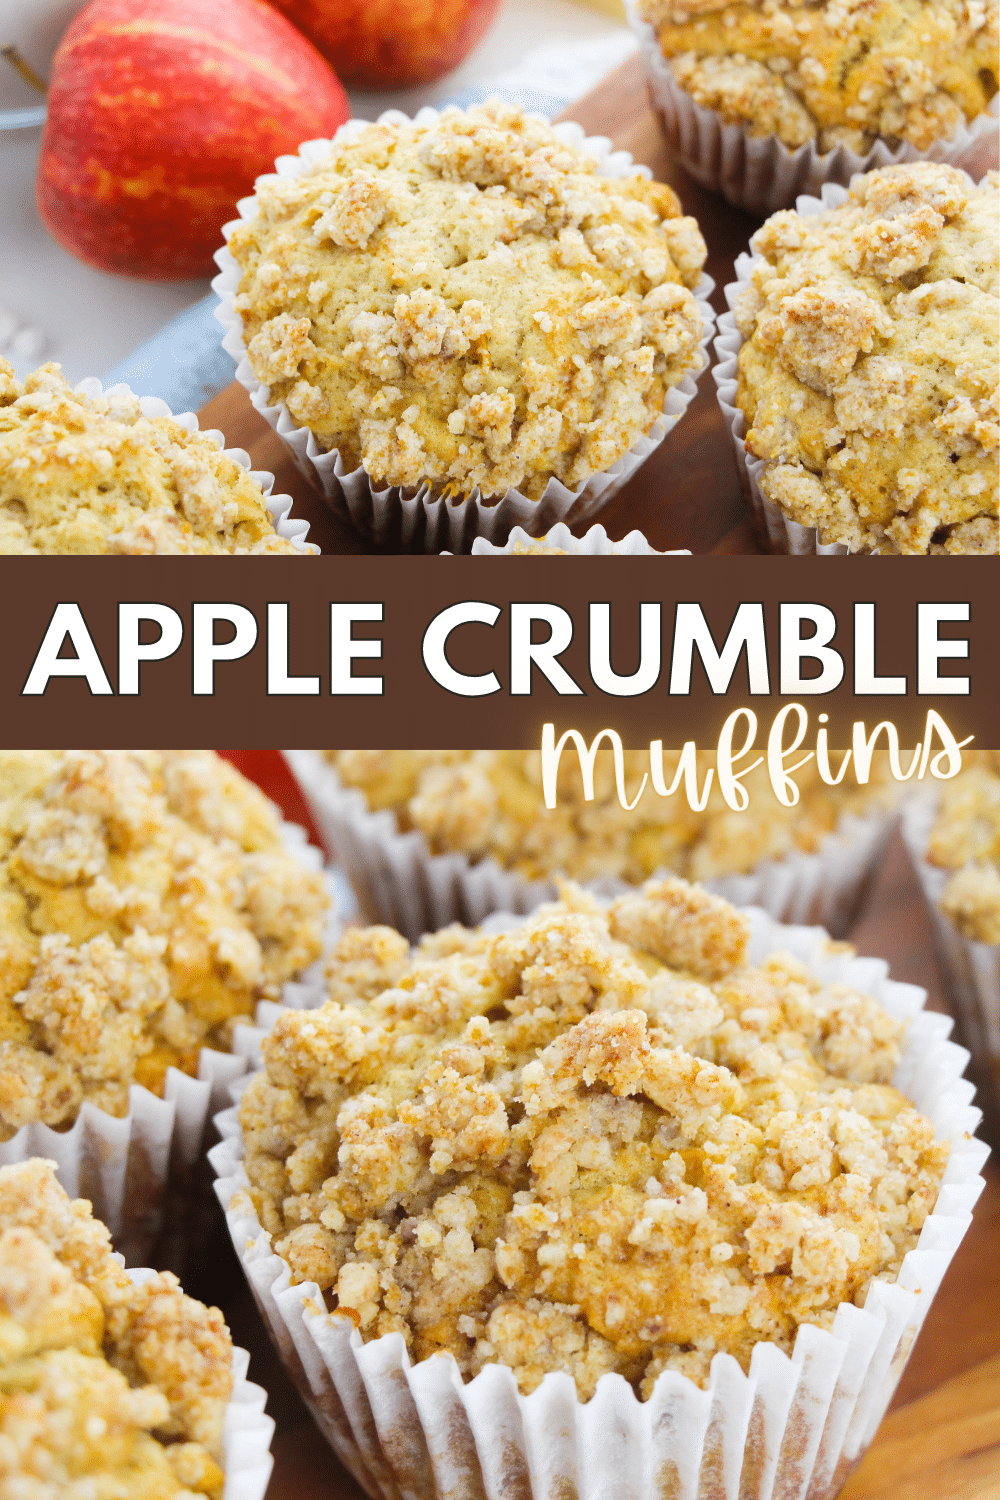 These jumbo Apple Crumble Muffins are moist and soft, packed with apple pieces and cinnamon, crowned with a delicious streusel topping. #applecrumblemuffins #muffinrecipe #streuseltopping #applemuffins #muffins via @wondermomwannab